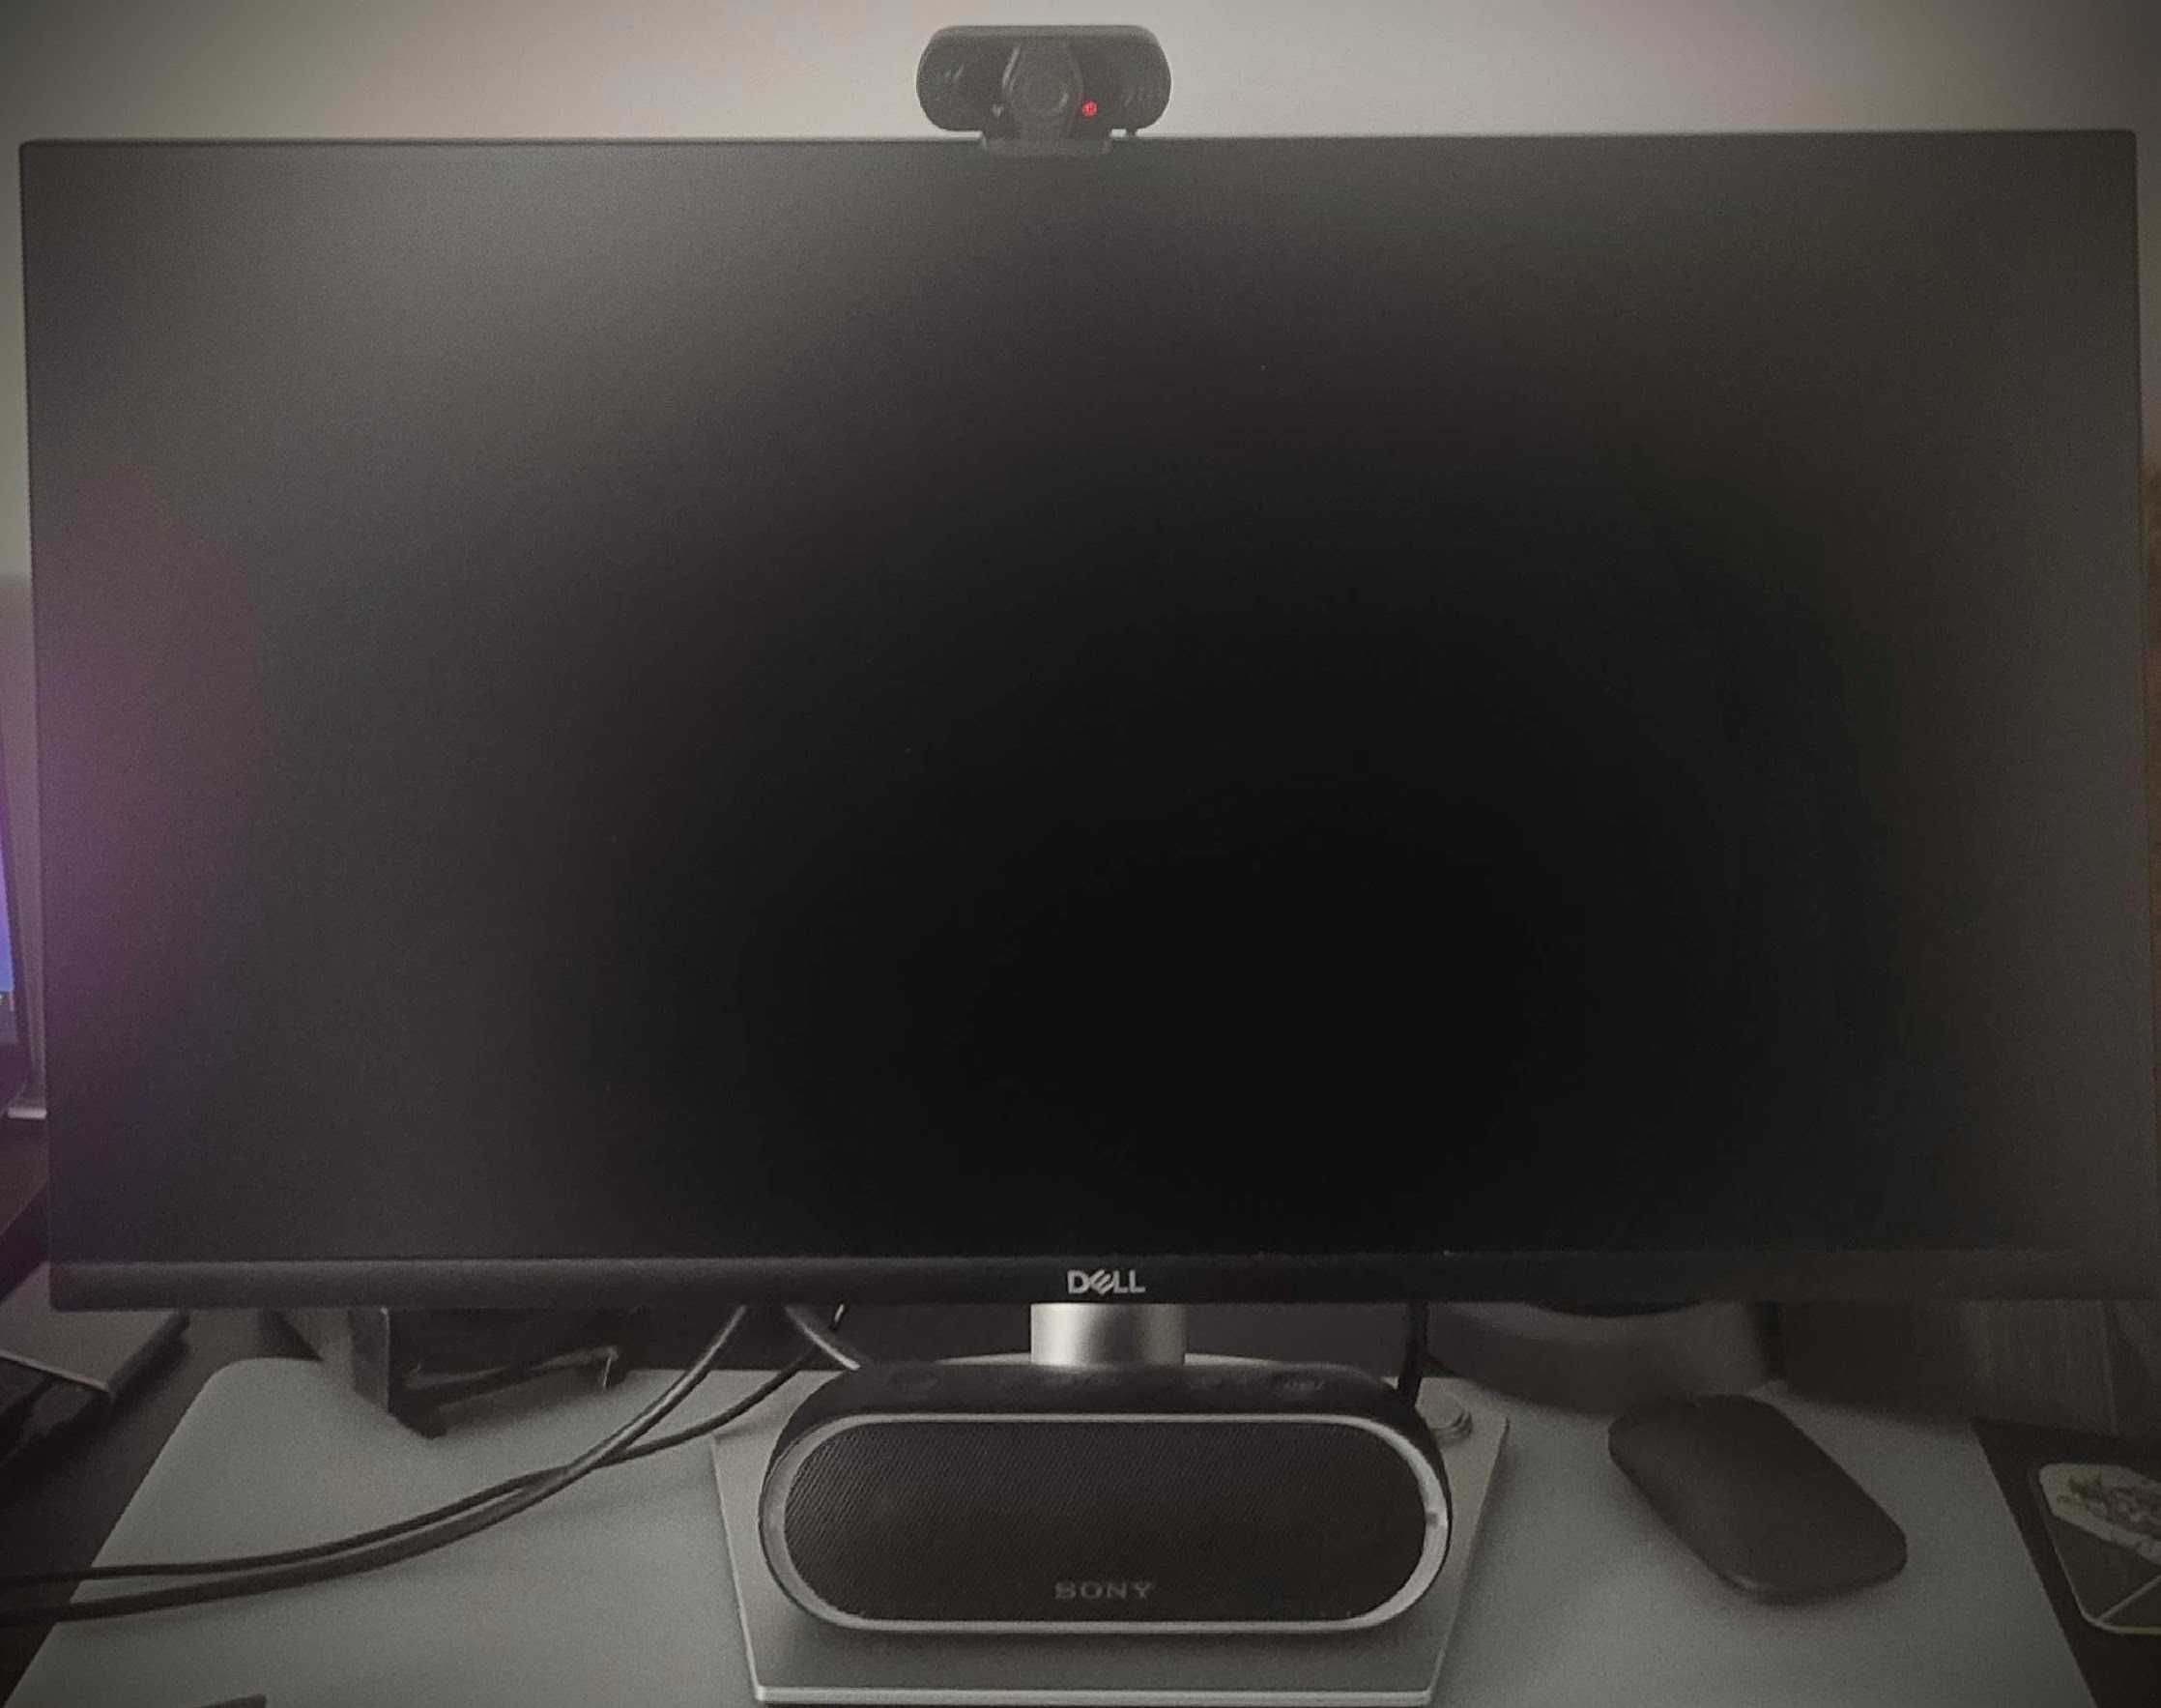 Monitor Dell S2721HS